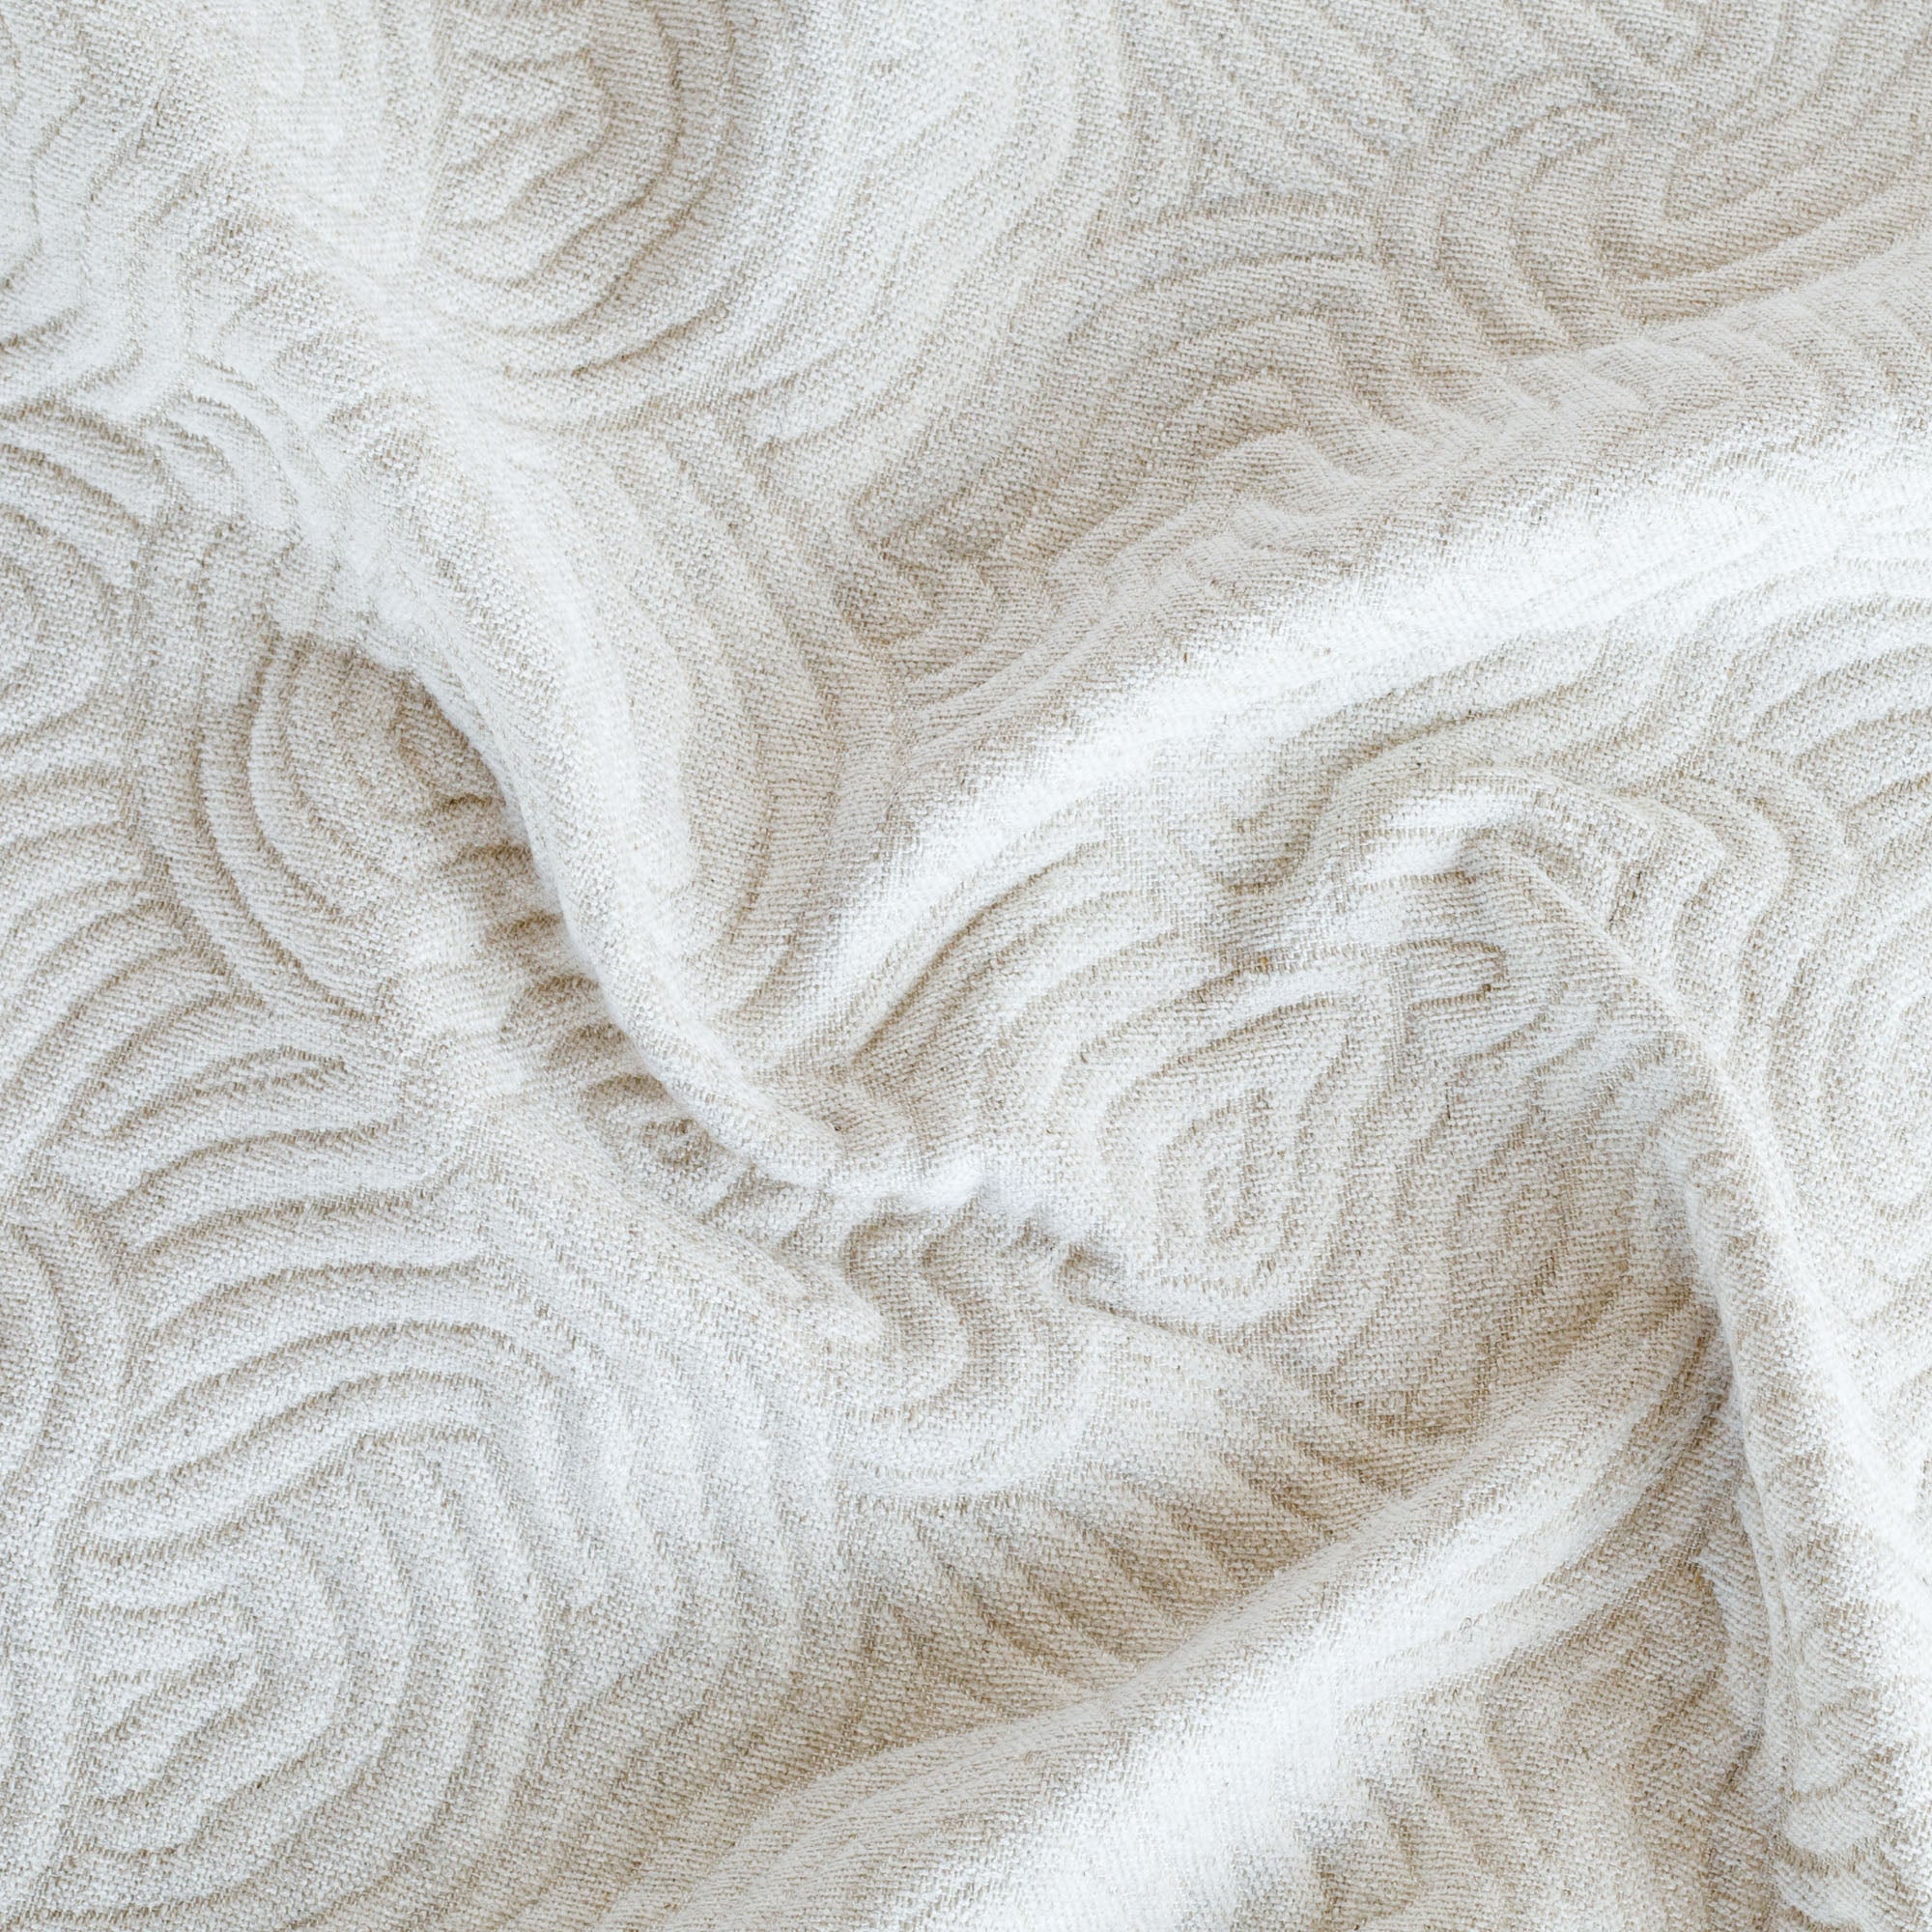 a soft cream quilted abstract floral patterned upholstery fabric